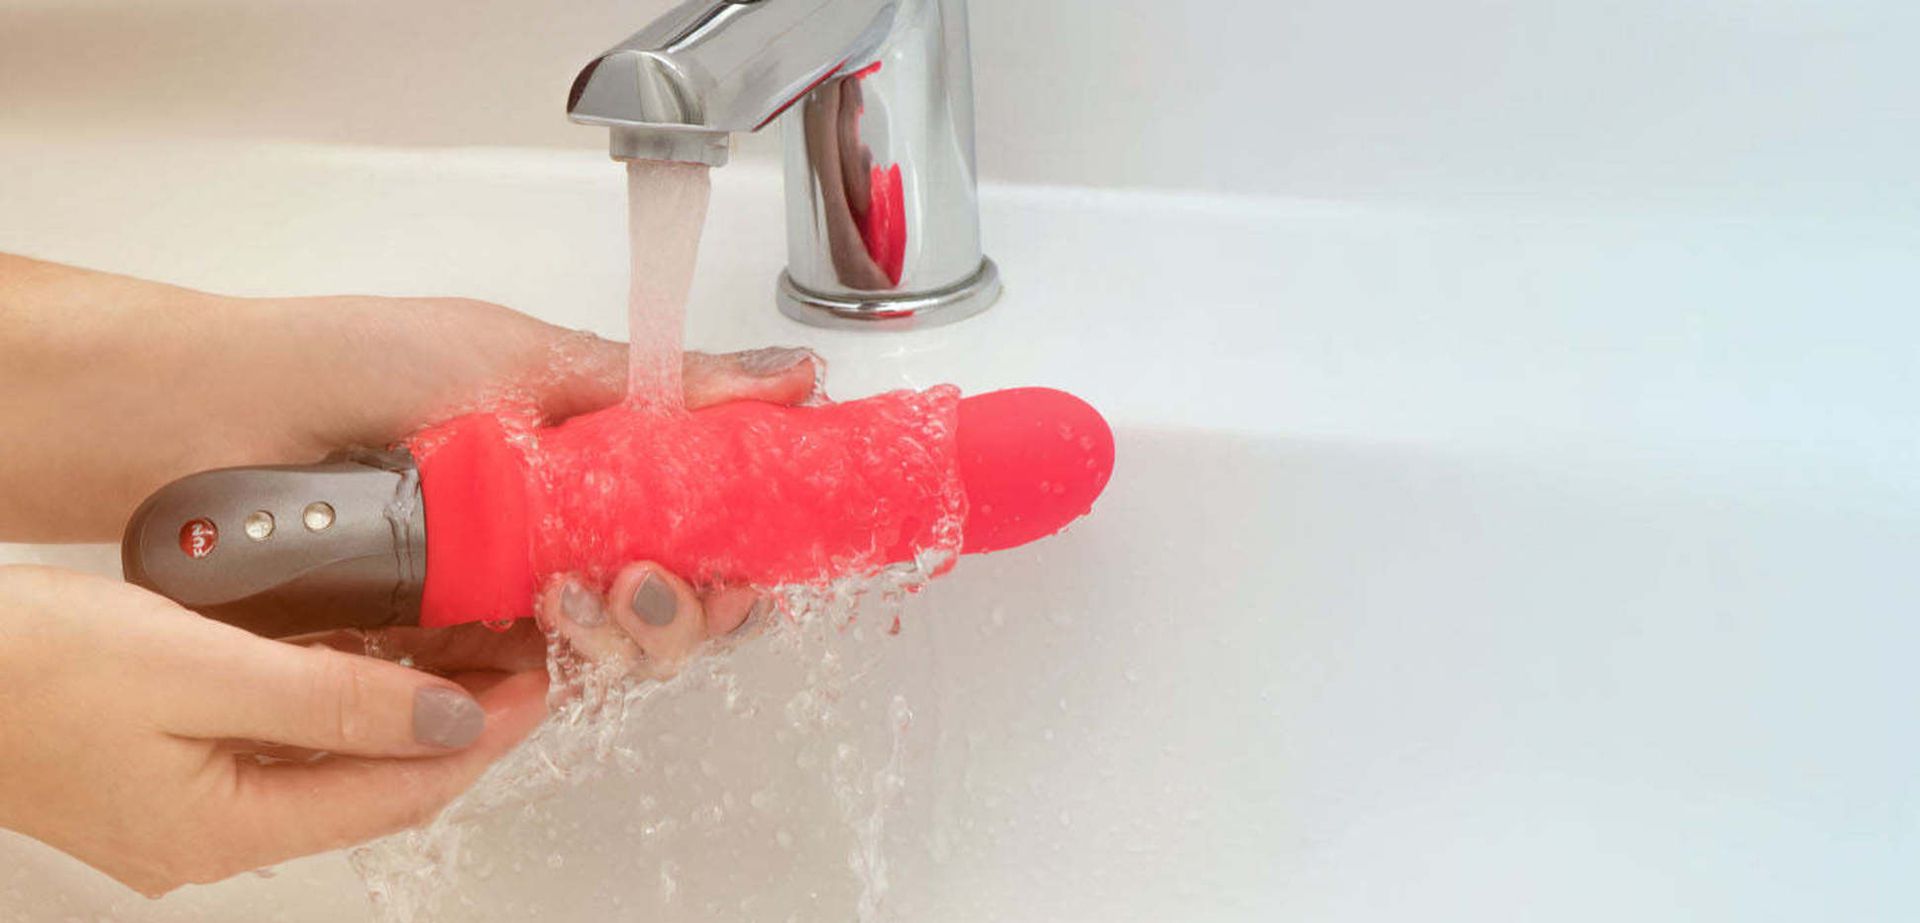 Cleaning a dildo with water.